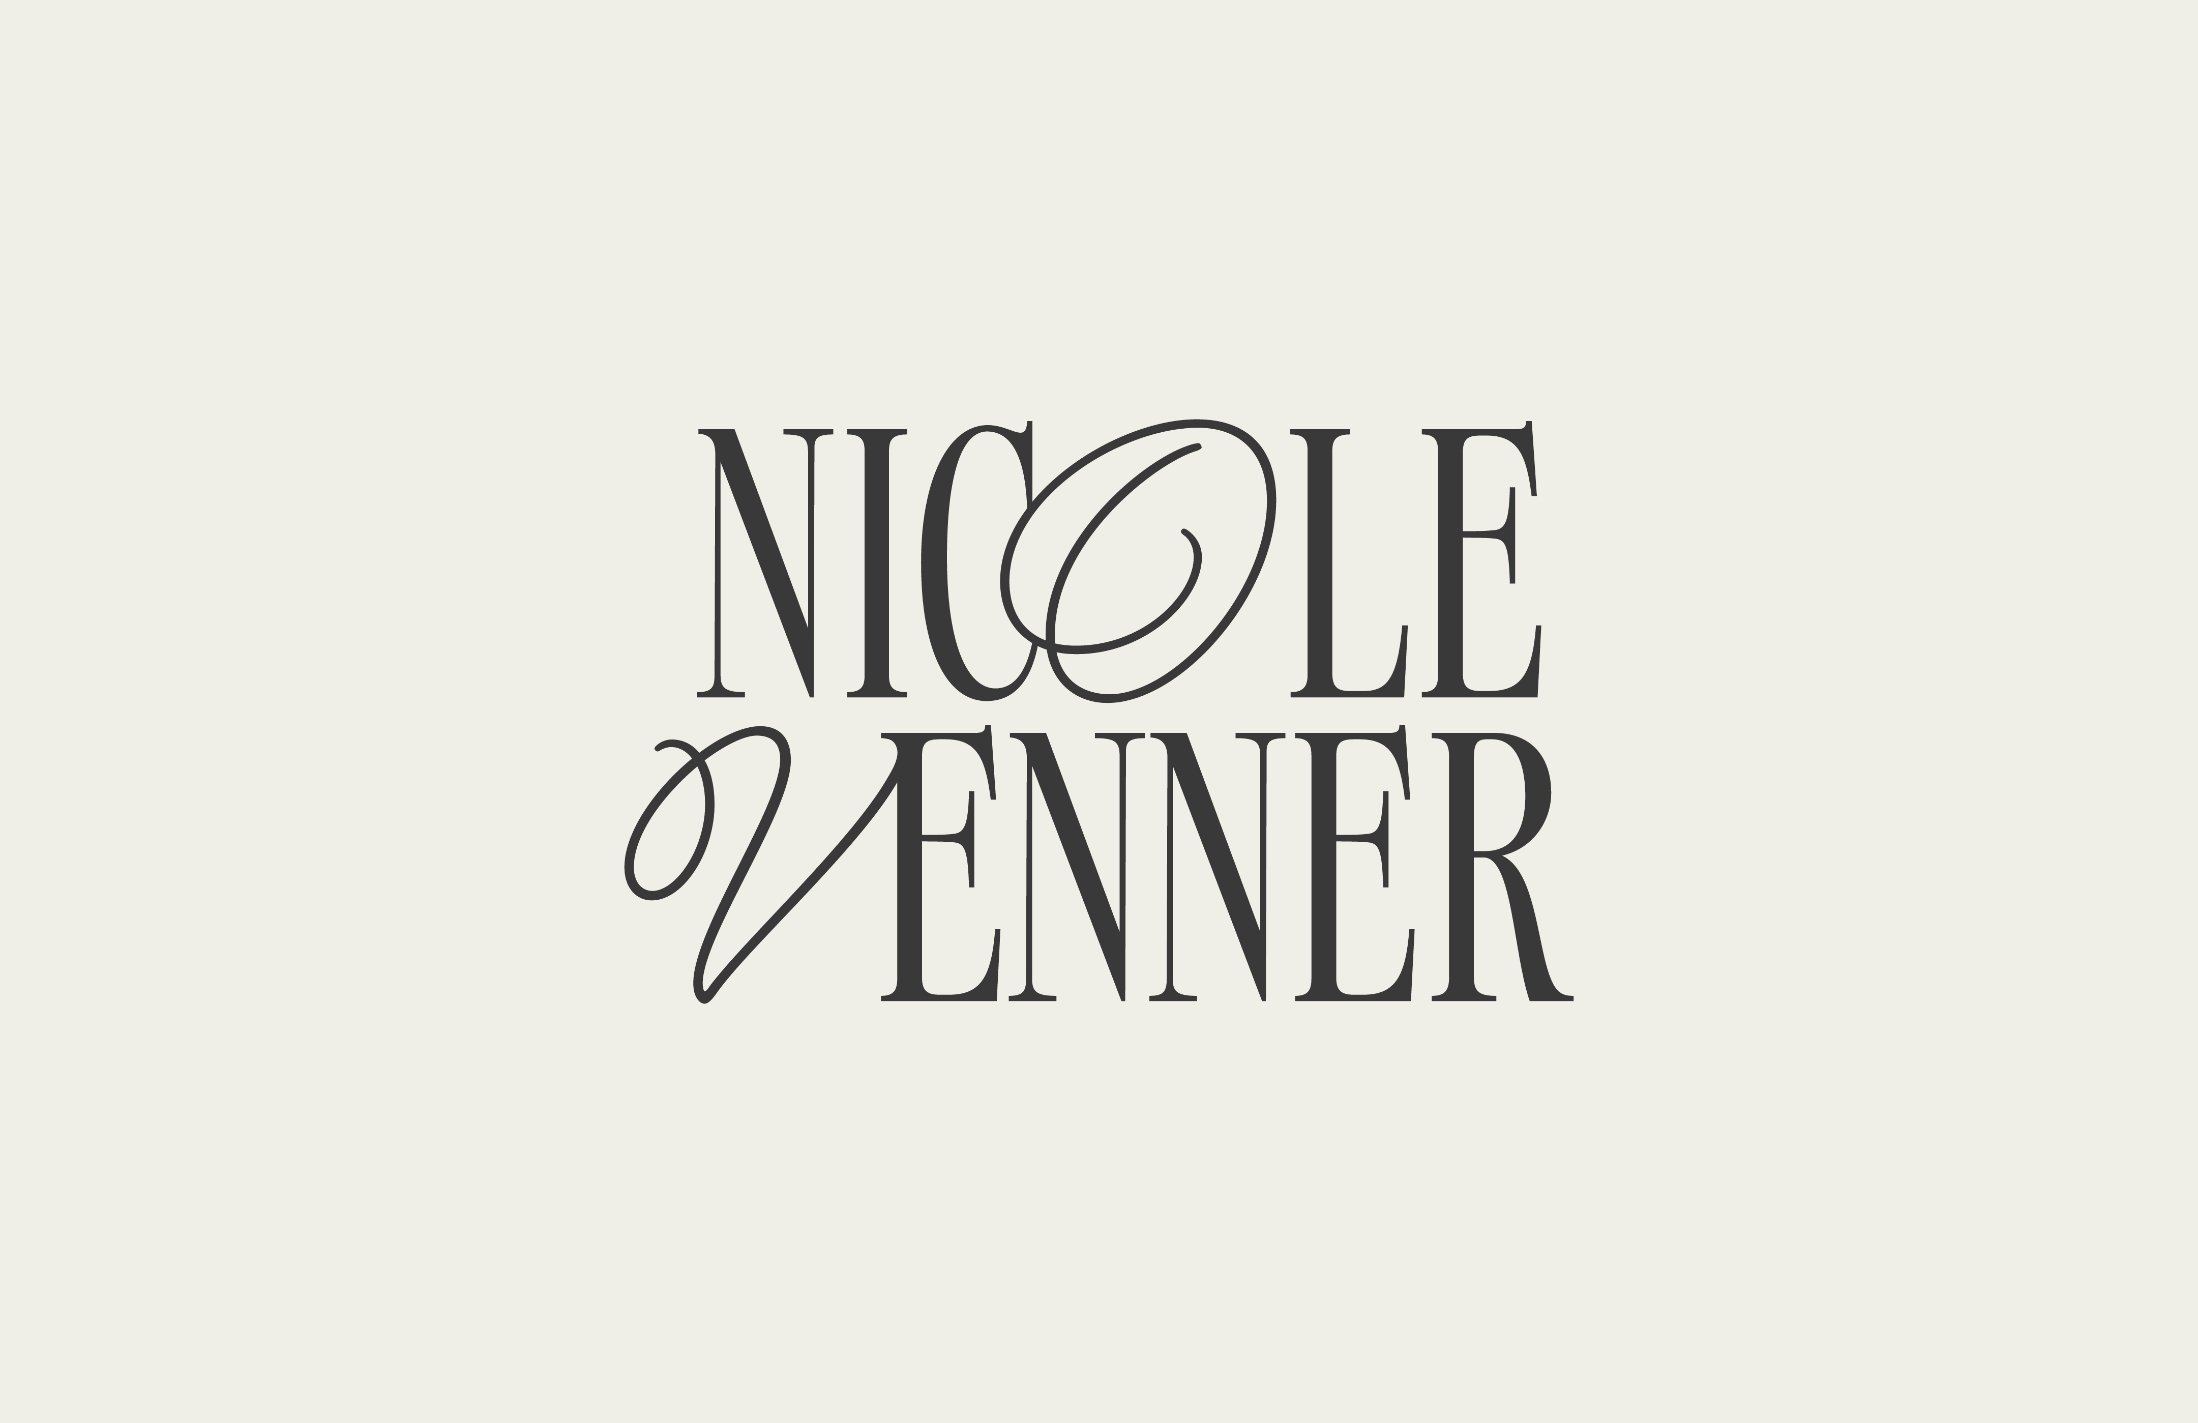 Typographic logo design featuring a mix of script and editorial serif letters